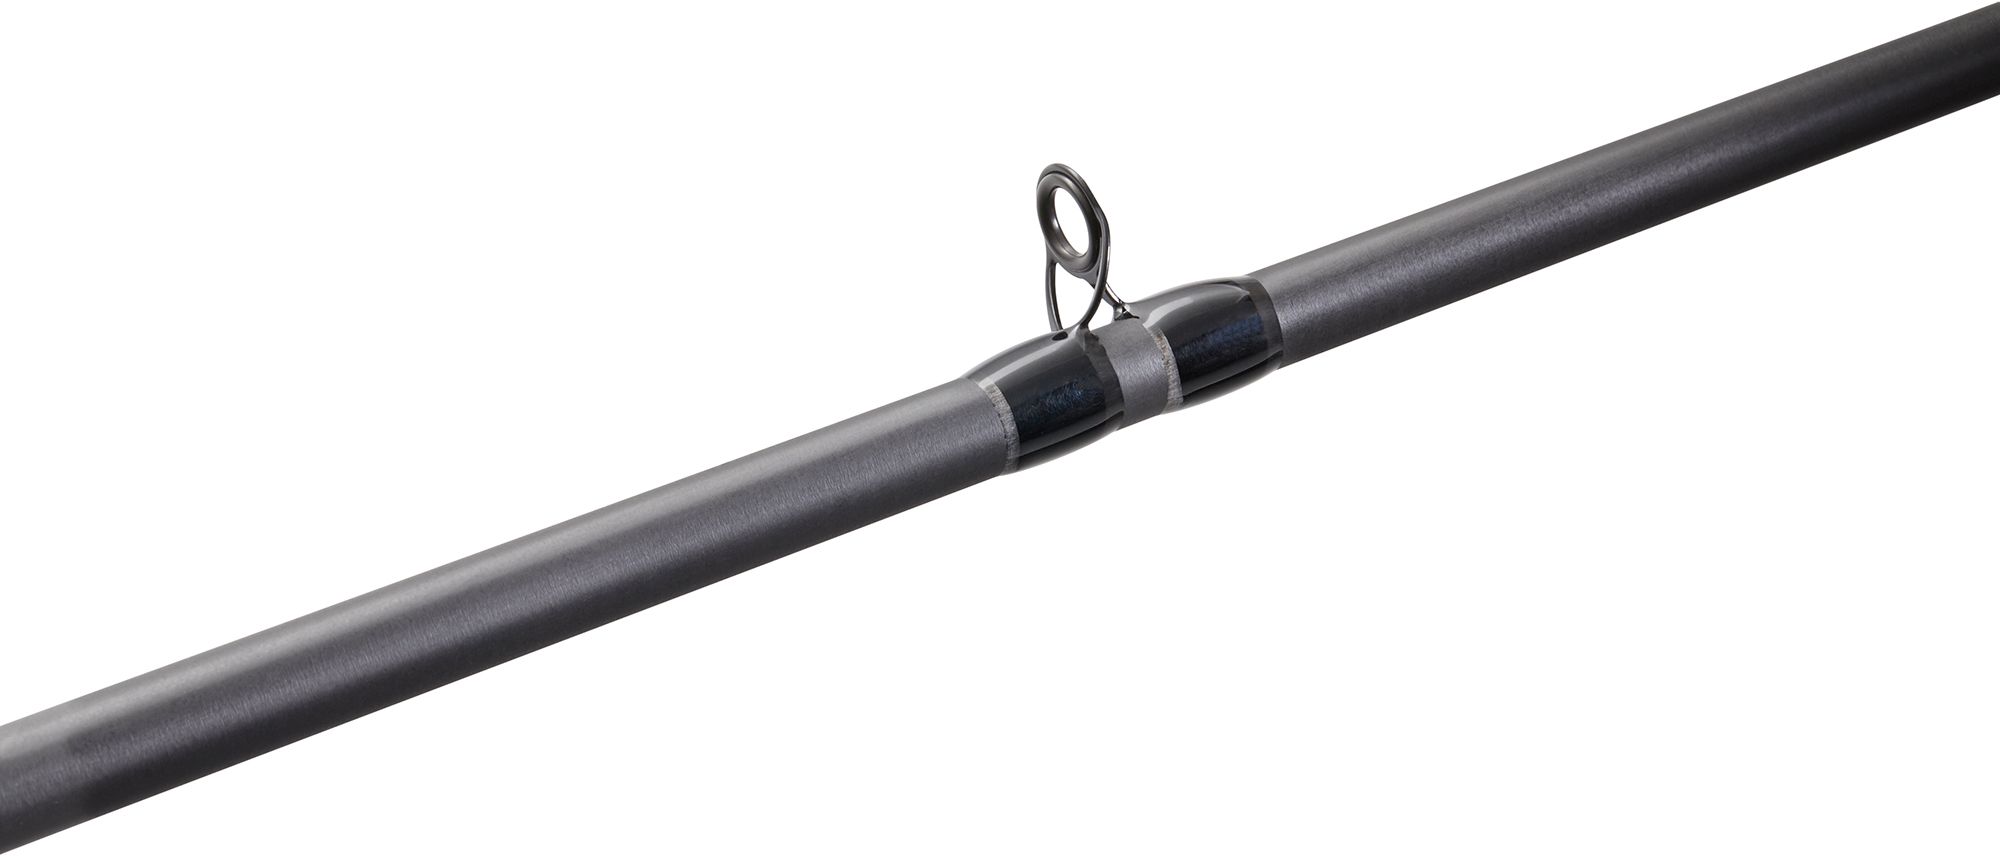 Dick's Sporting Goods St. Croix Bass X Casting Rod (2021)